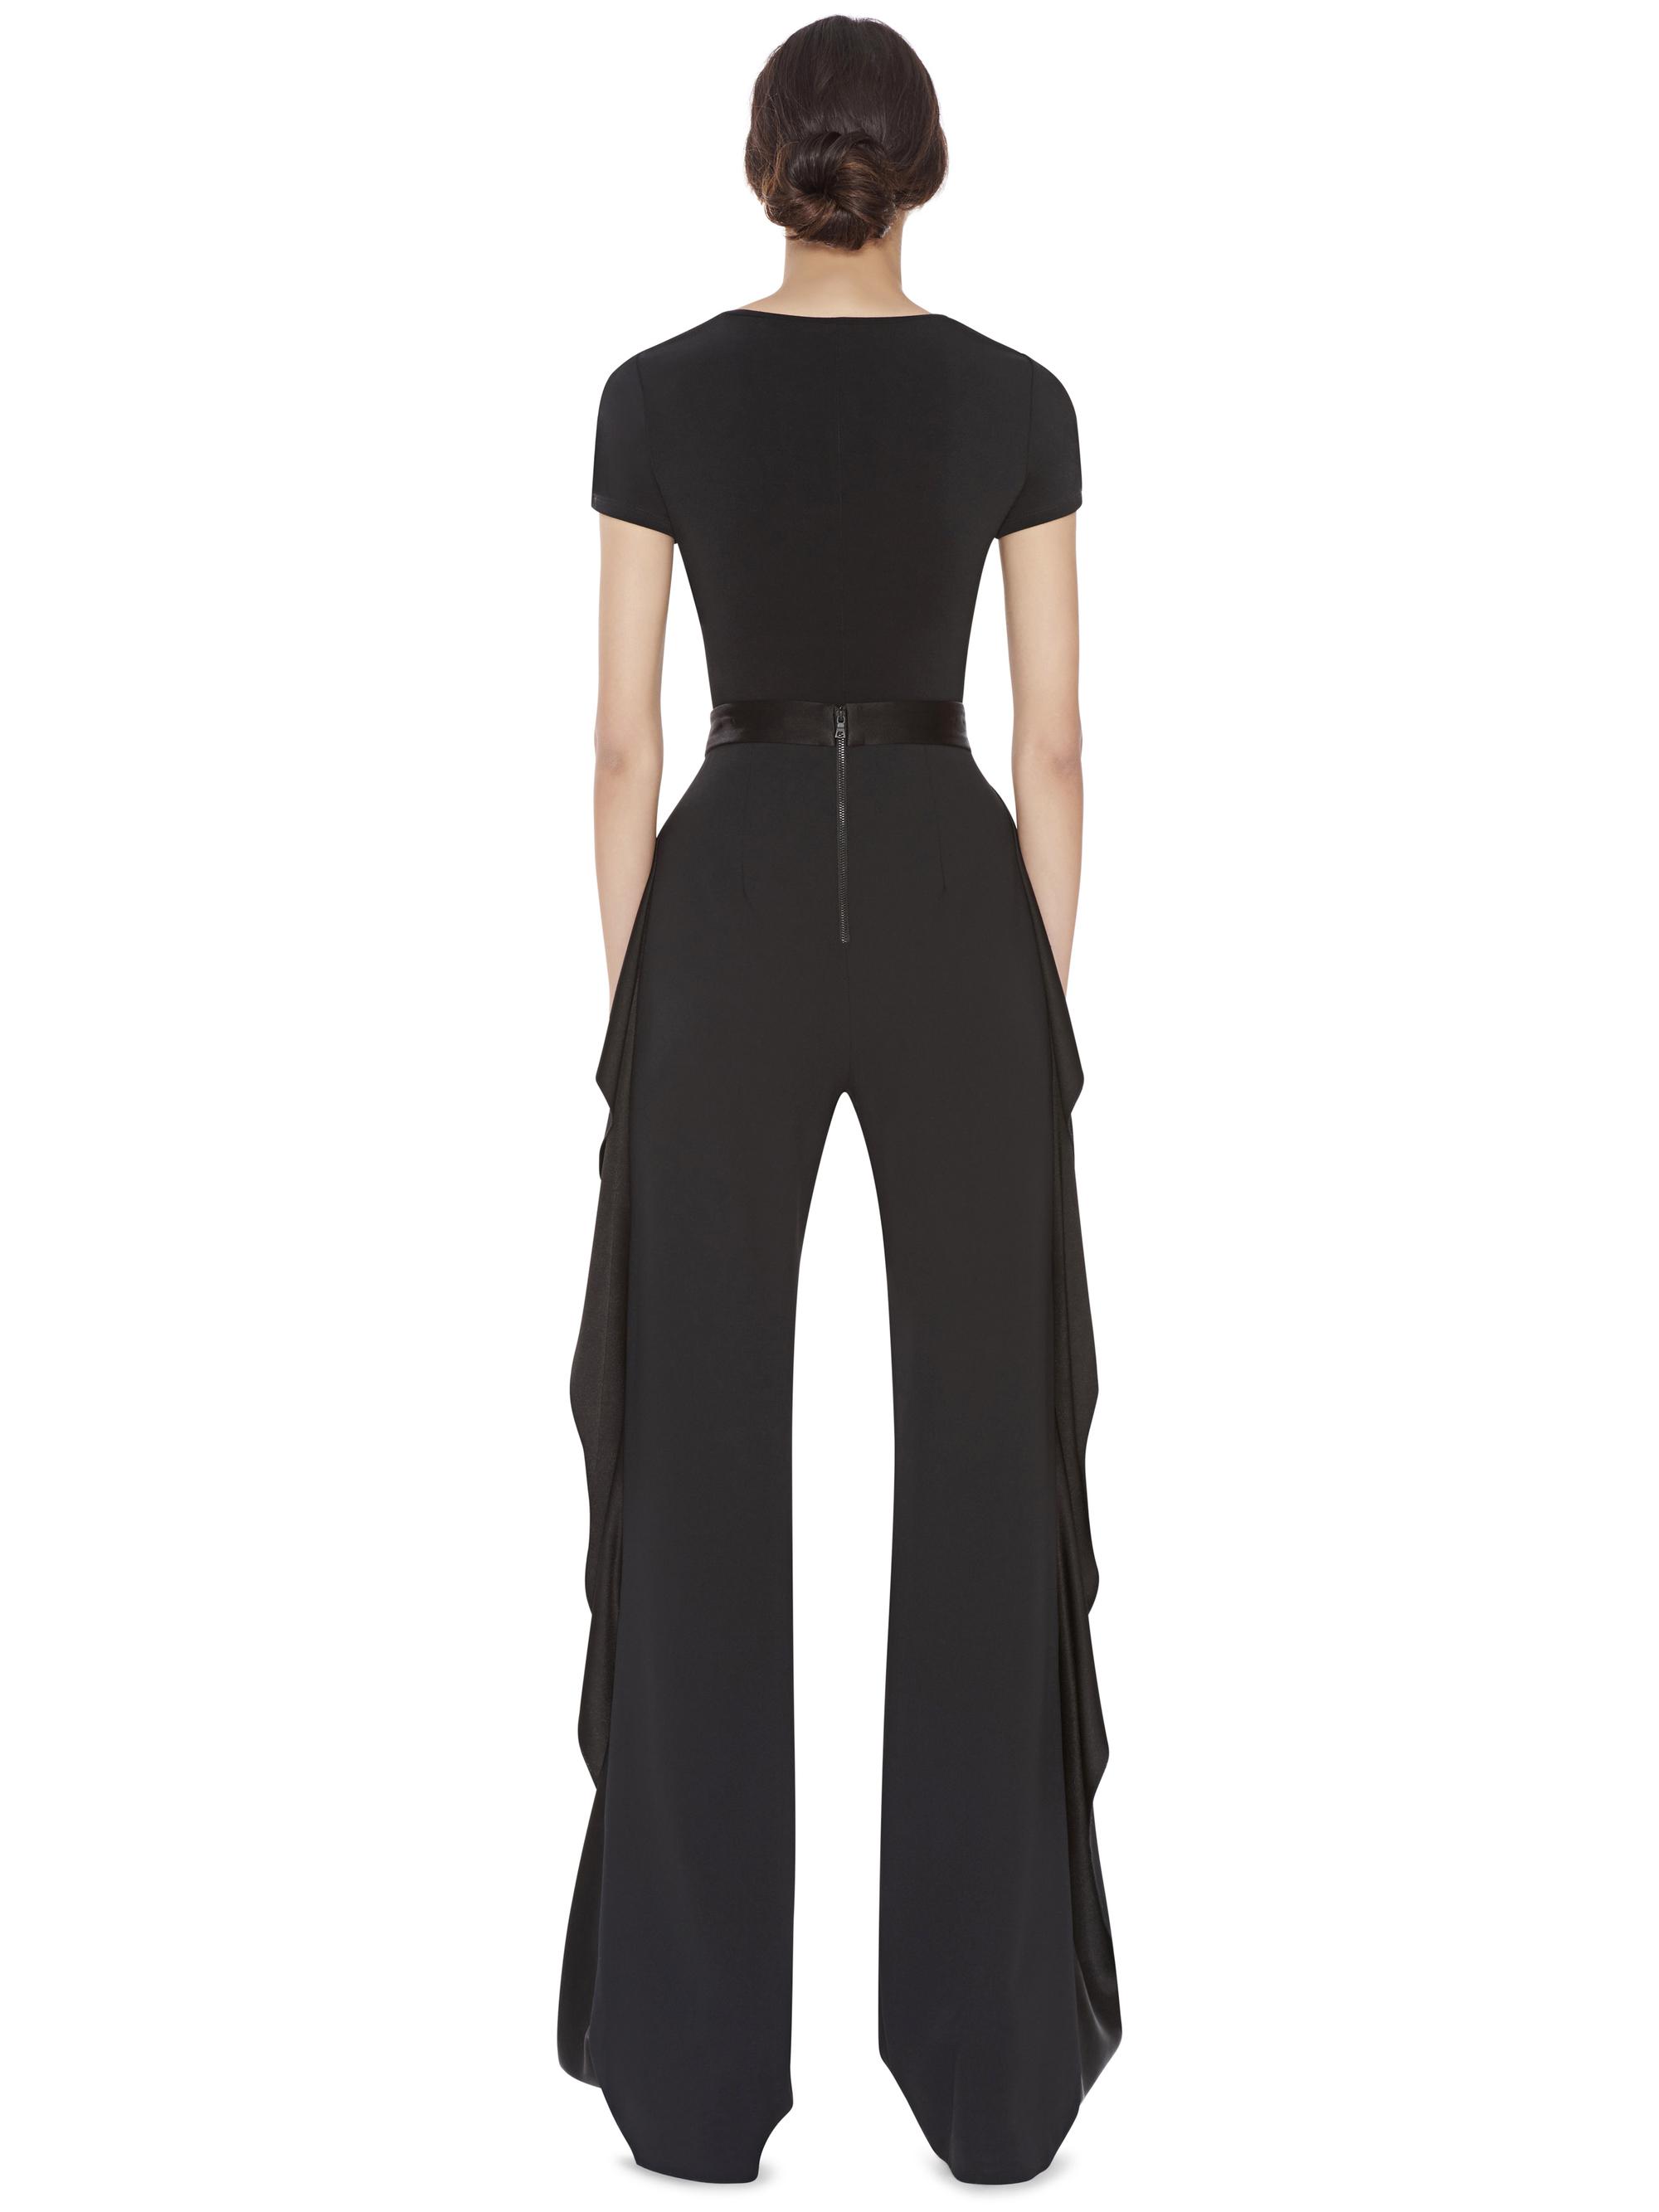 Alice + Olivia Wallace Side Ruffle Pant in Black - Lyst